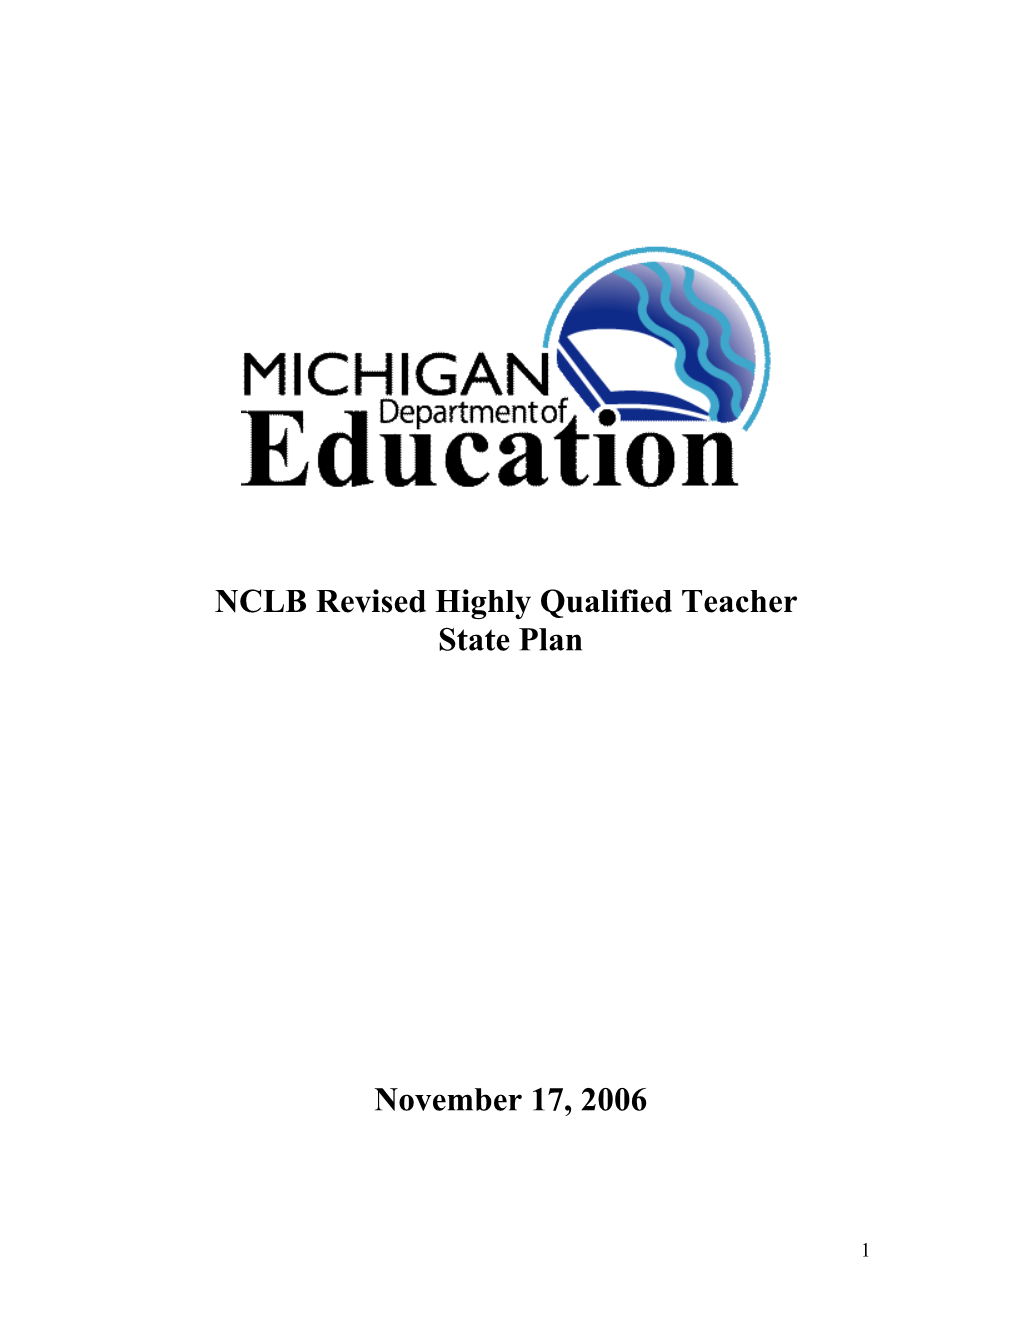 Michigan - Revised Highly Qualified Teachers State Plan (MS WORD)